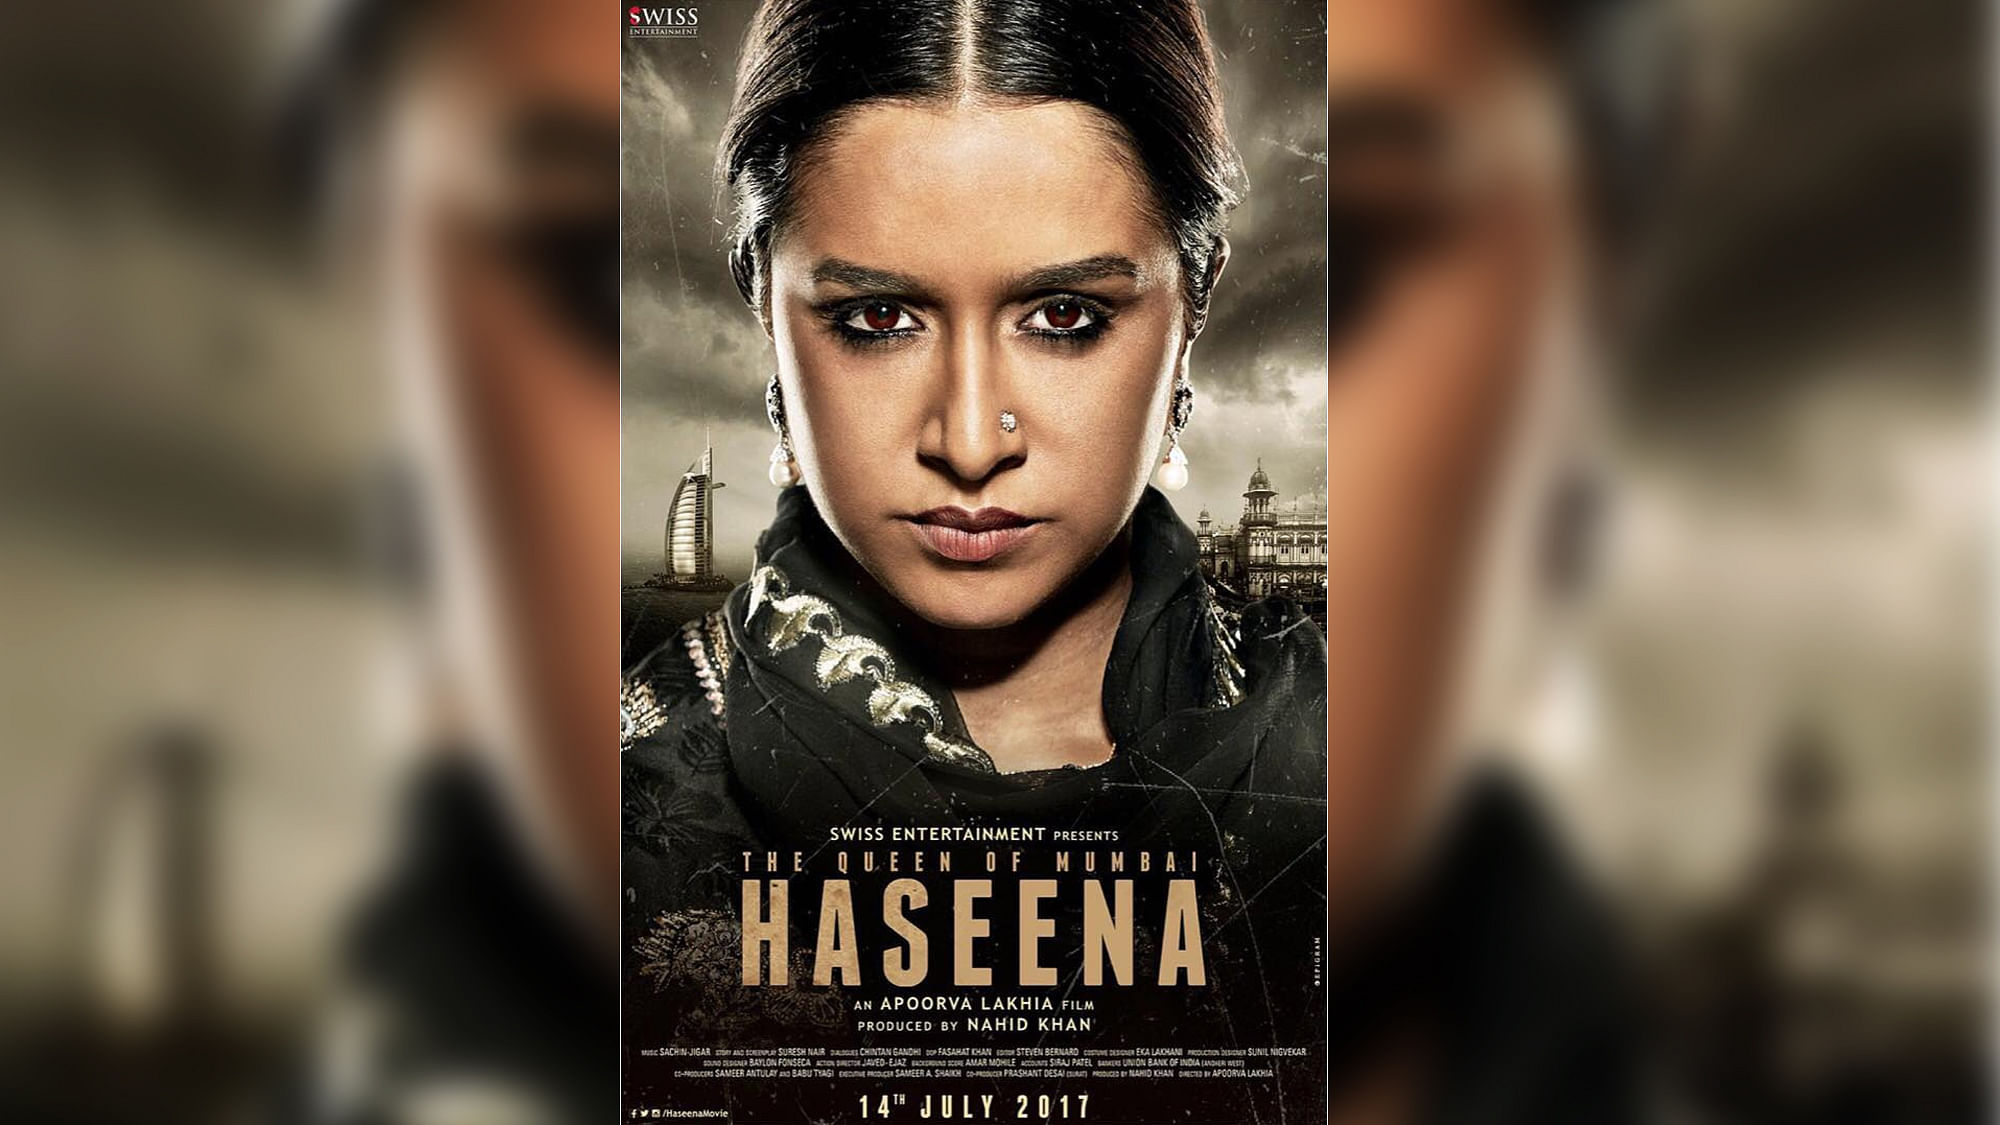 

Shraddha Kapoor in the first look of <i>Haseena</i>. (Photo Courtesy: <a href="http://www.dnaindia.com/entertainment/report-shraddha-kapoor-to-wear-the-same-outfits-as-haseena-parkar-in-real-life-2325179">Instagram/ ShraddhaKapoor</a>)